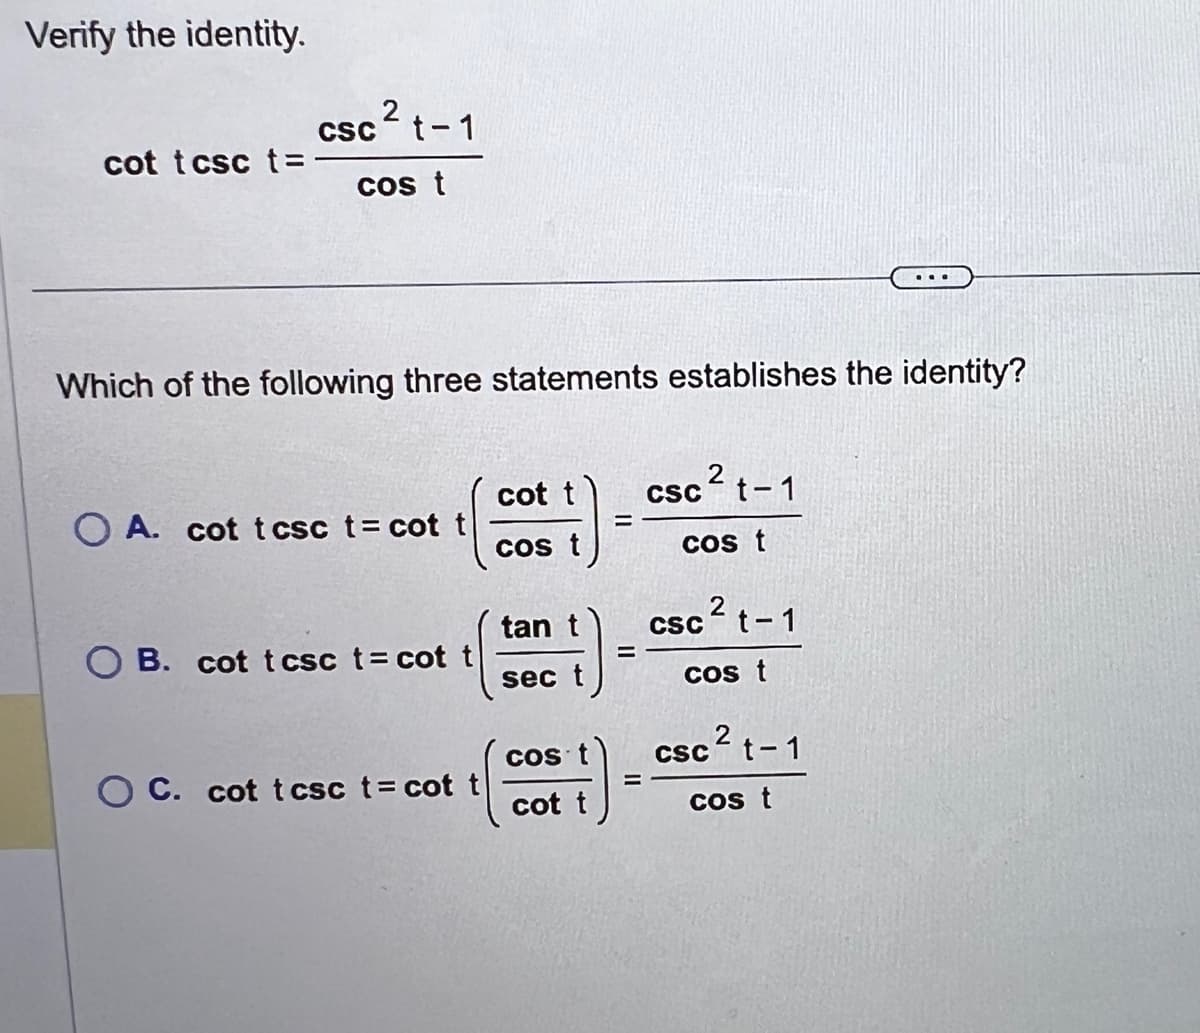 Verify the identity.
cot tcsc t=
2
csct-1
cos t
Which of the following three statements establishes the identity?
OA. cot tcsc t= cot t
OB. cot tcsc t = cot t
OC. cot tcsc t = cot
cot t
cos t
tan t
sec t
COS
cot t
=
csc ² t-1
cos t
csc ² t-1
2
cos t
csc ² t-1
cos t